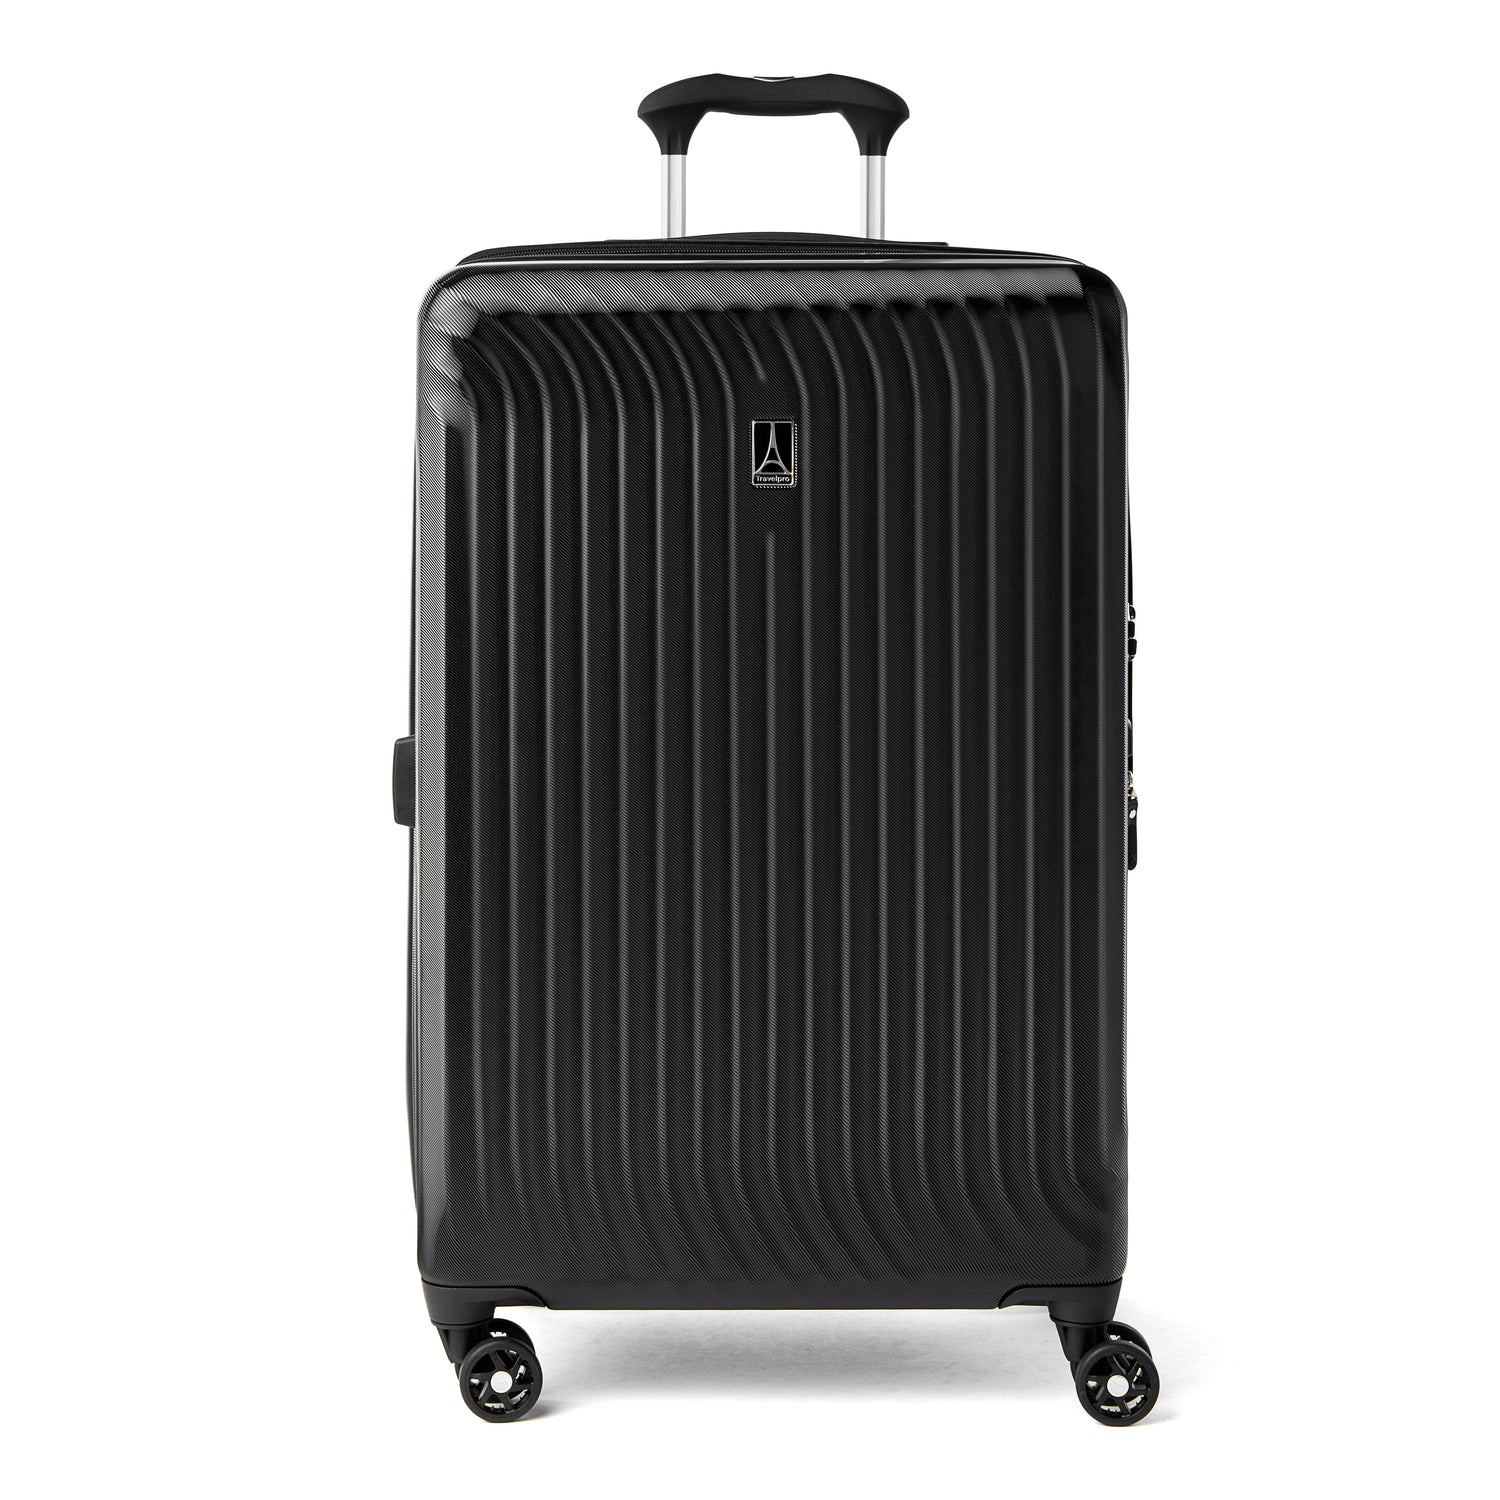 Travelpro Maxlite Air Medium Check-in Expandable Hardside Spinner Luggage - Black